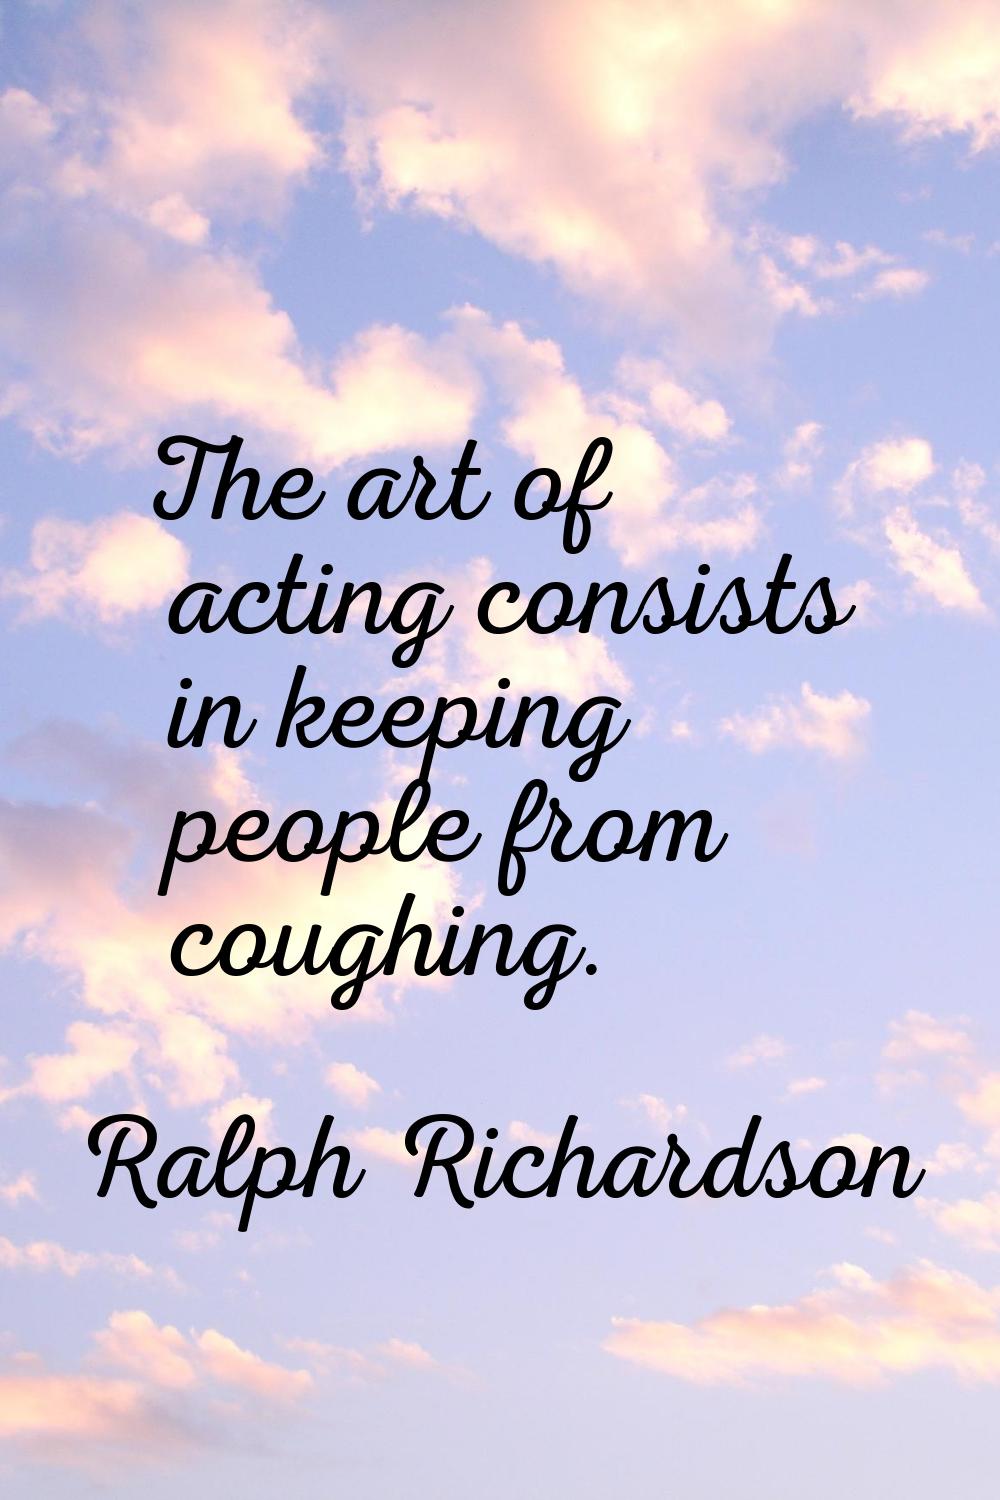 The art of acting consists in keeping people from coughing.